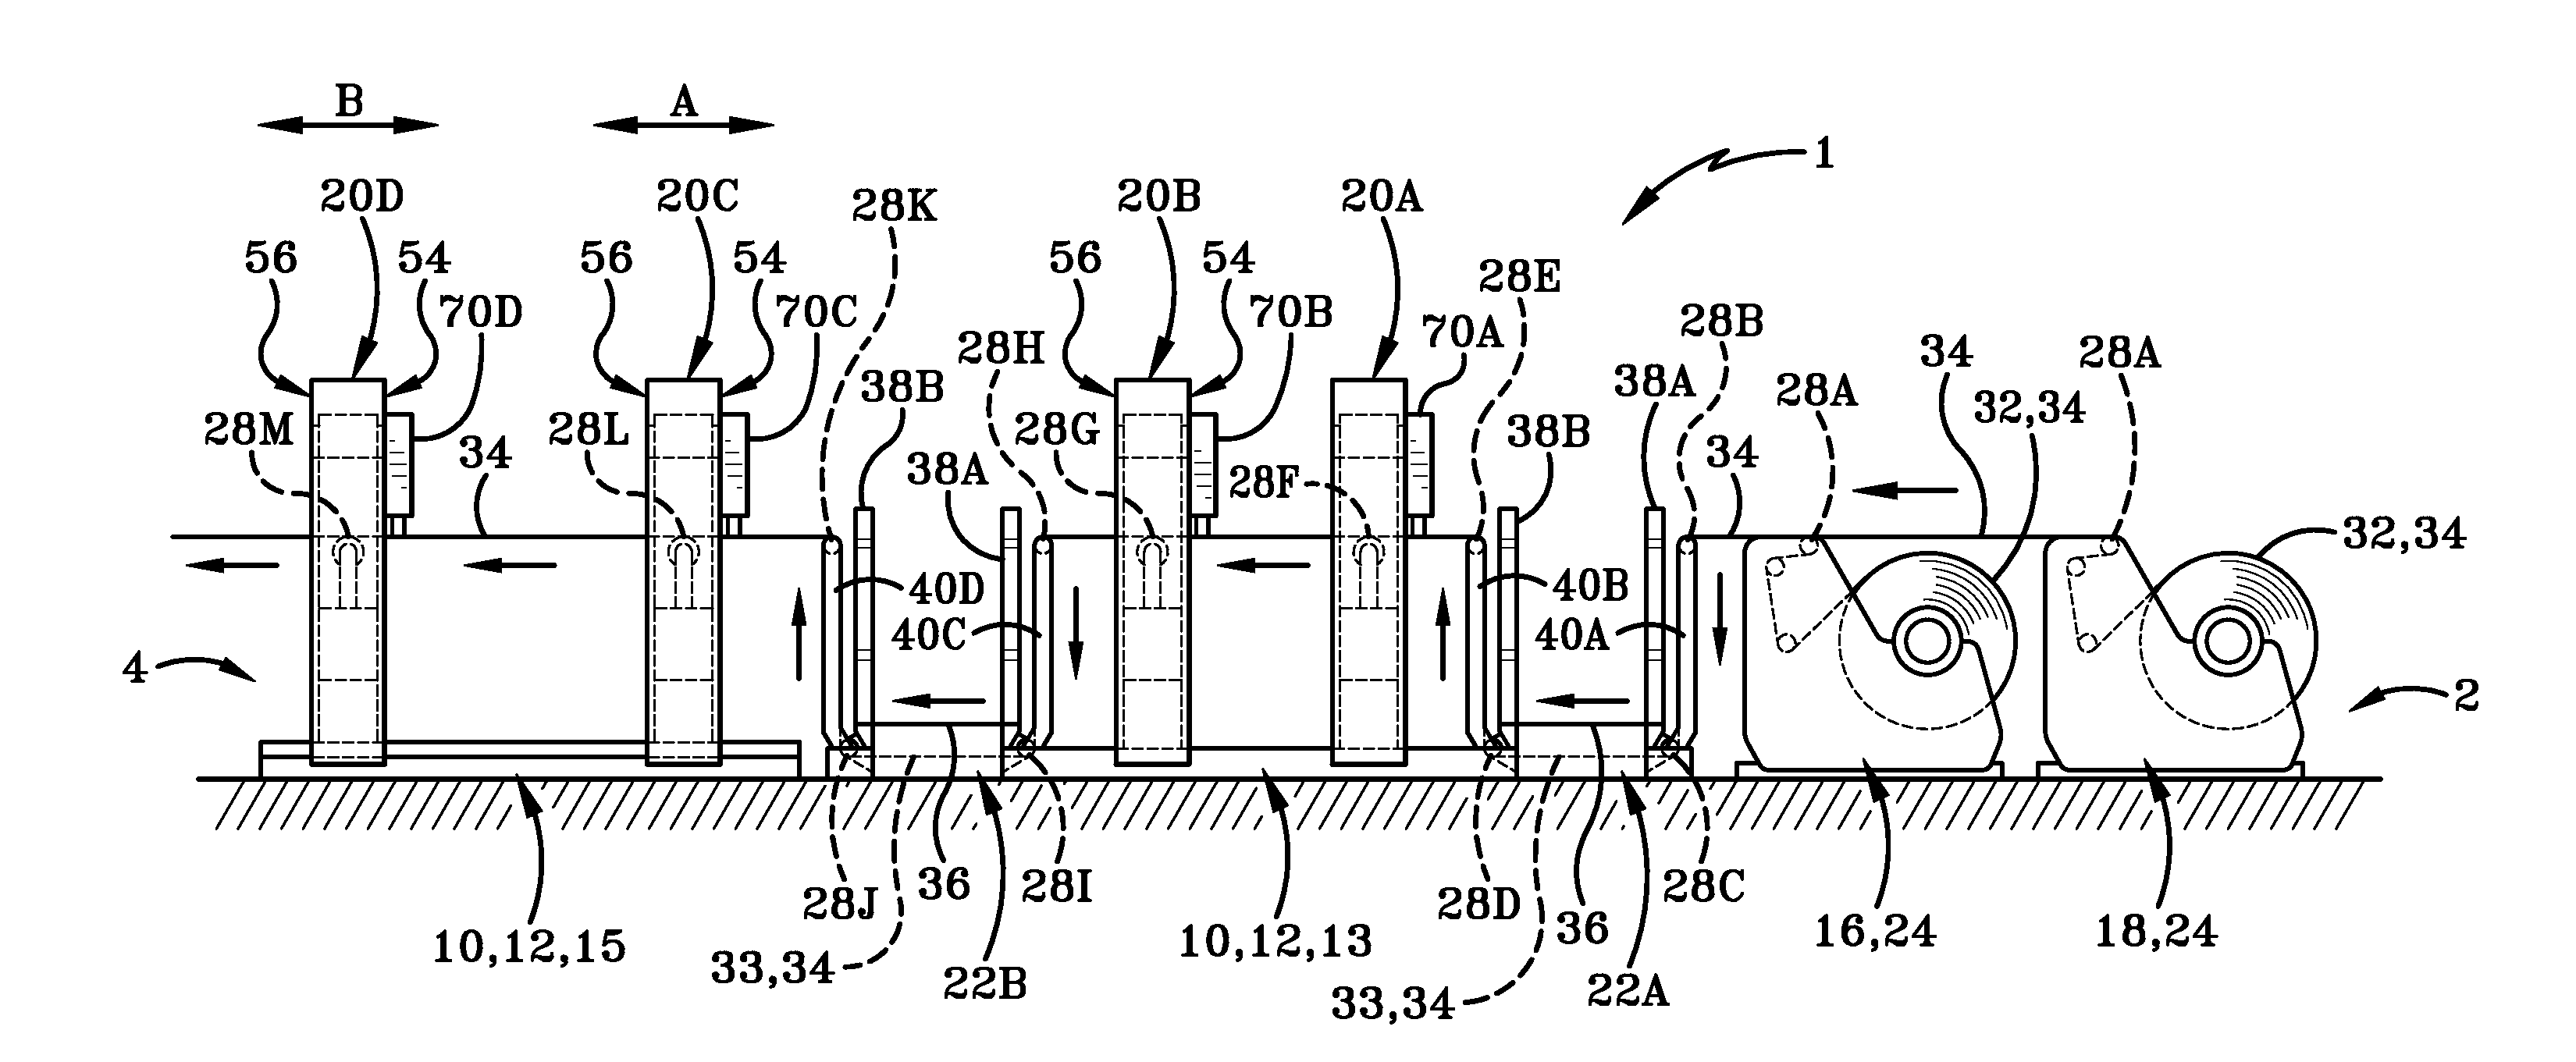 Dual roll fabric welding machine and method of operation